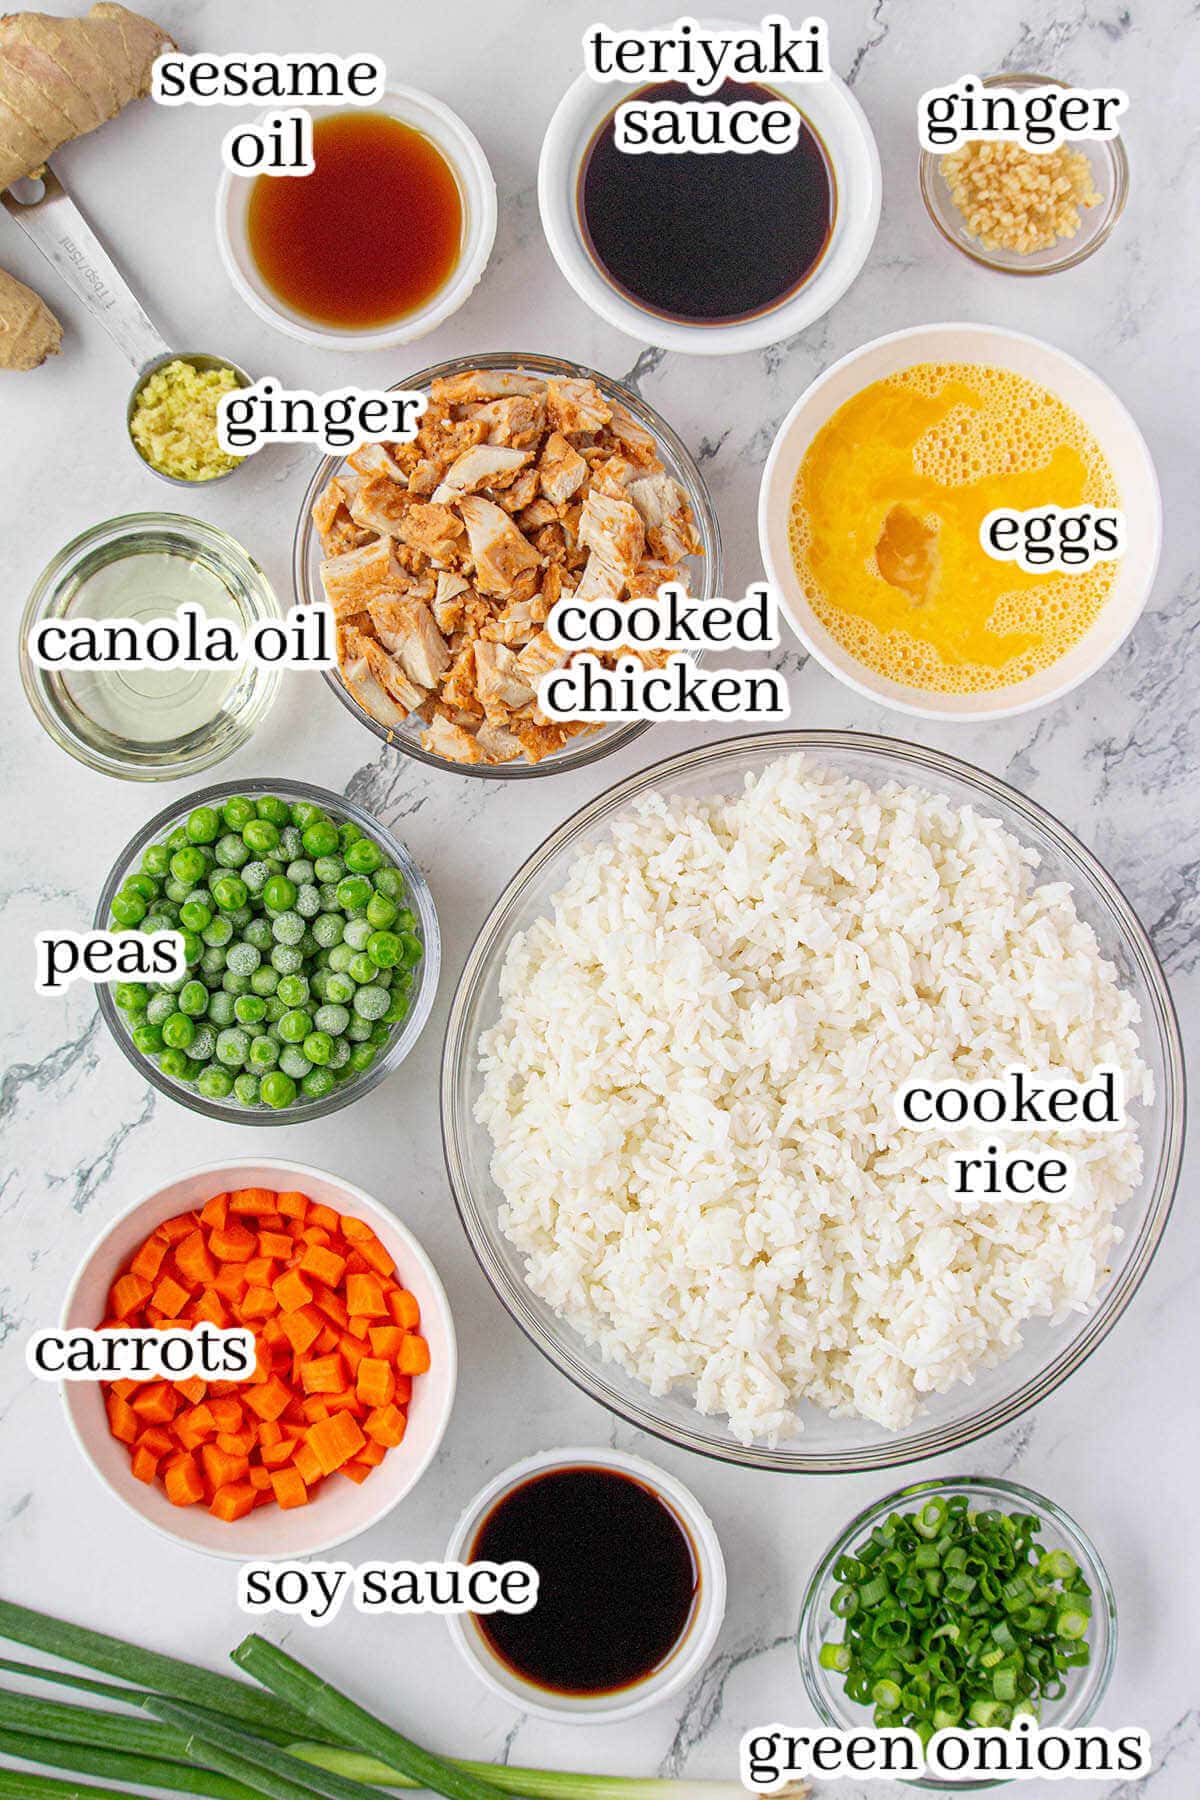 Ingredients to make stir-fry dish, with print overlay.